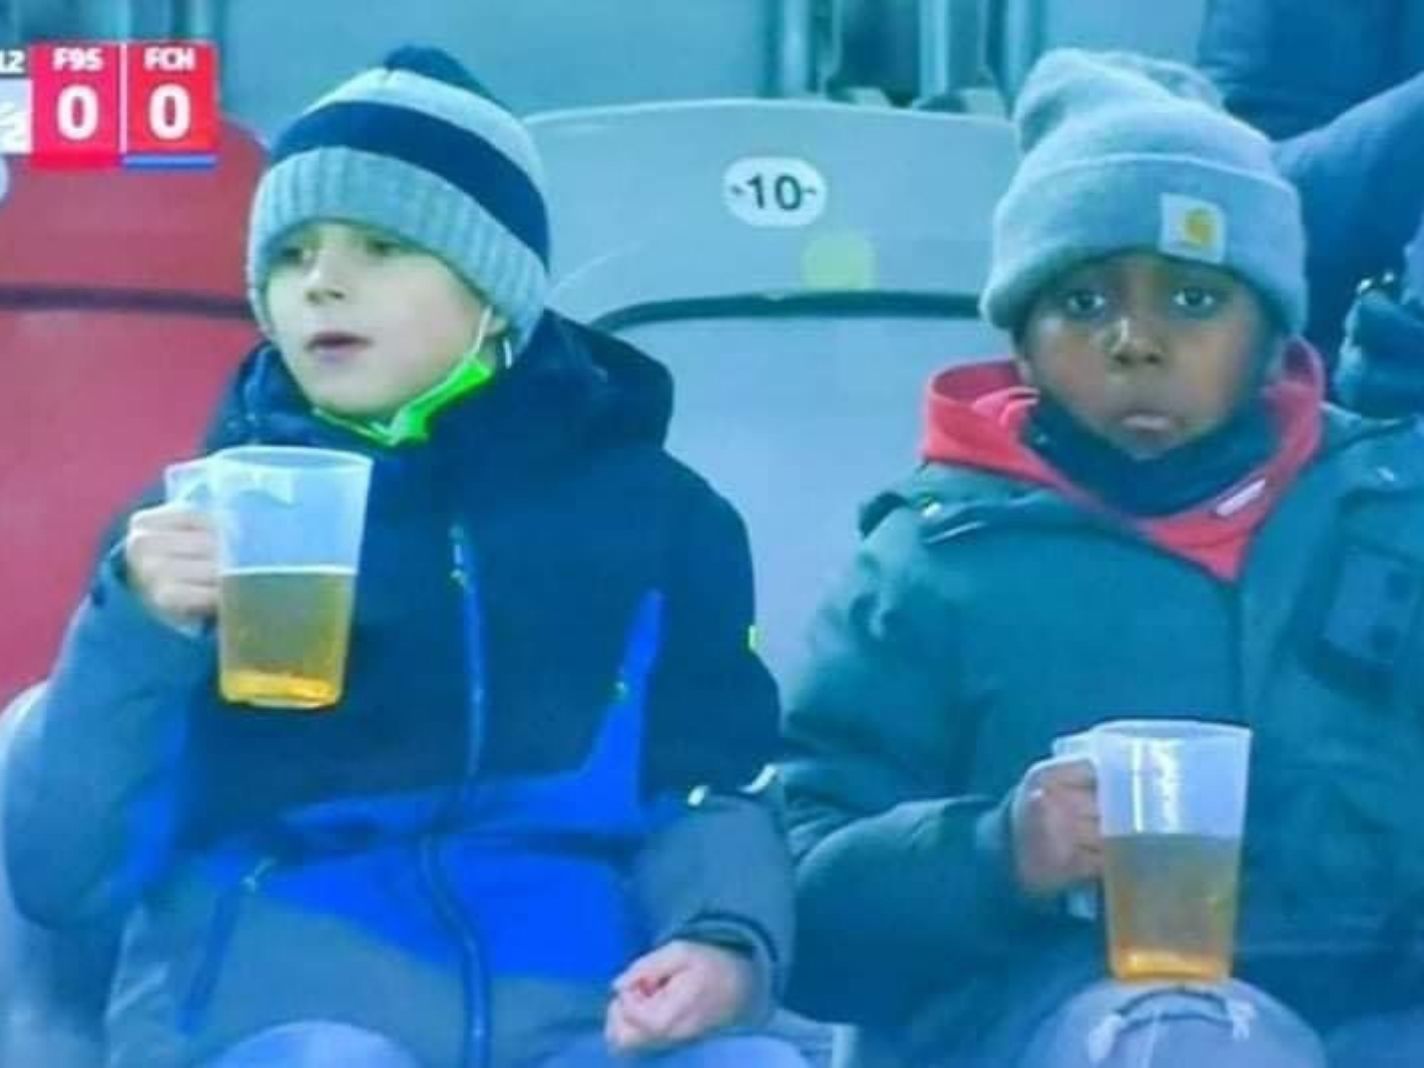 Young football fans spotted drinking beer in Germany - Here's the truth behind viral photo